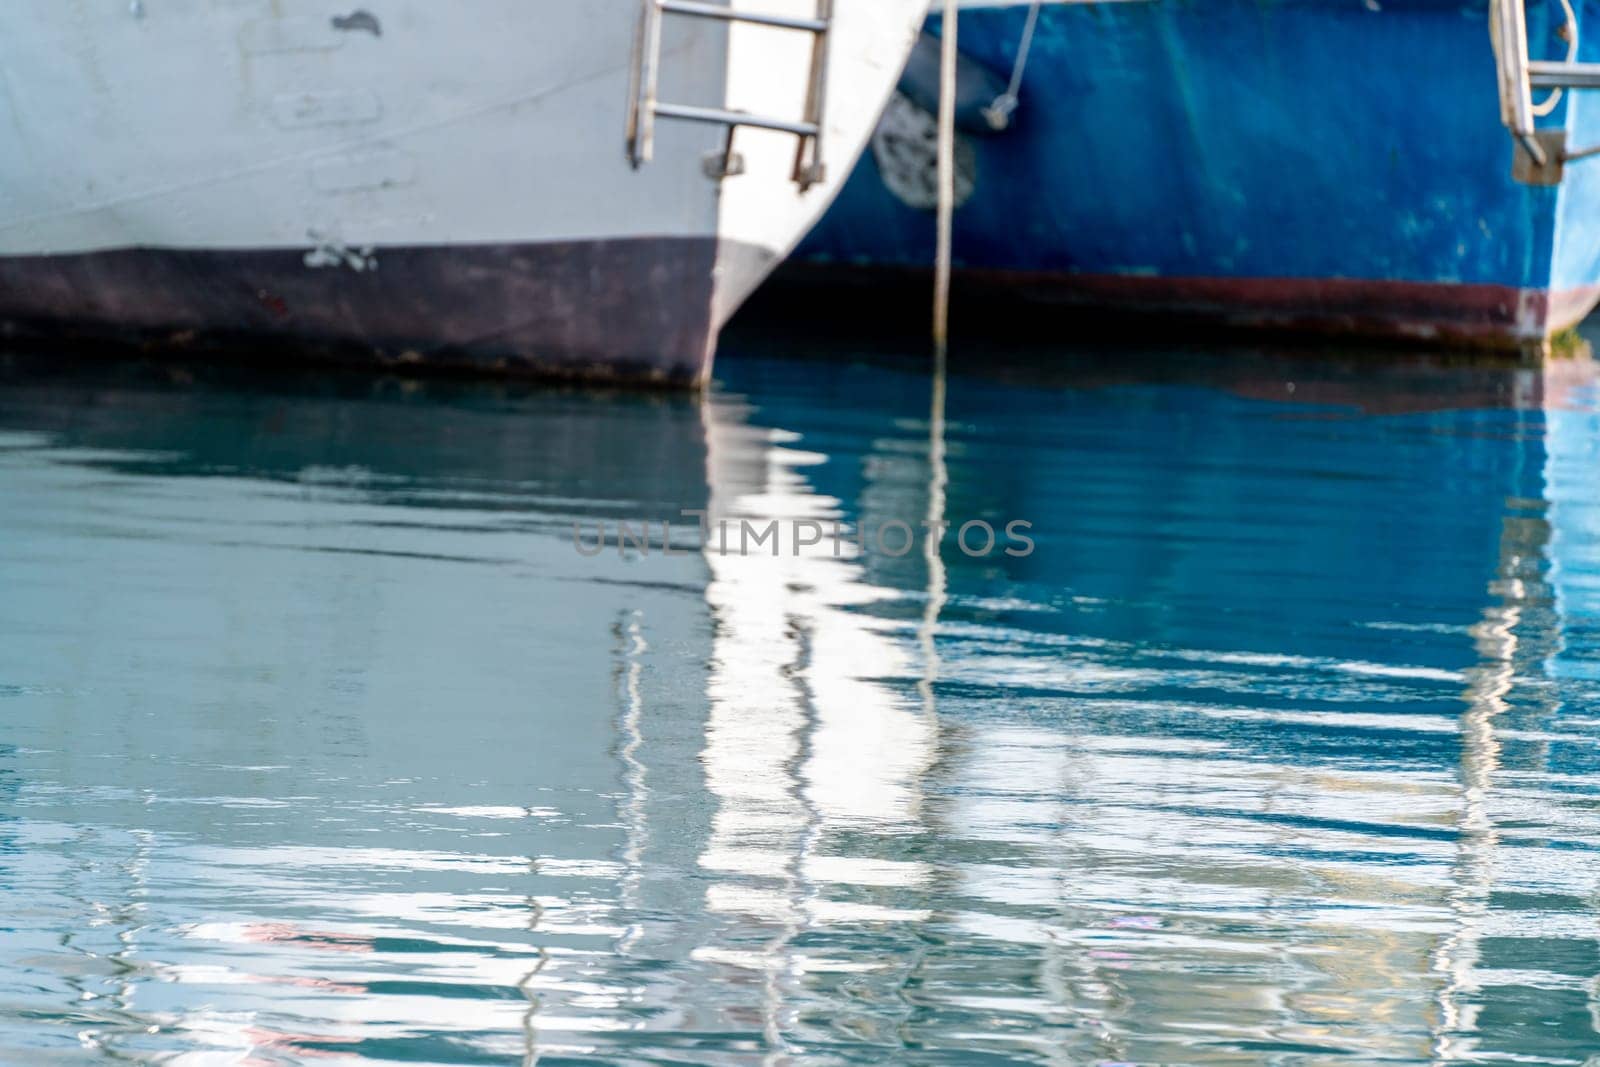 Reflection in the sea surface of white yachts parked in the port on the shore. Fragment of a ship on the water and the reflection of ships in the sea. motionless mirrored water of the sea.